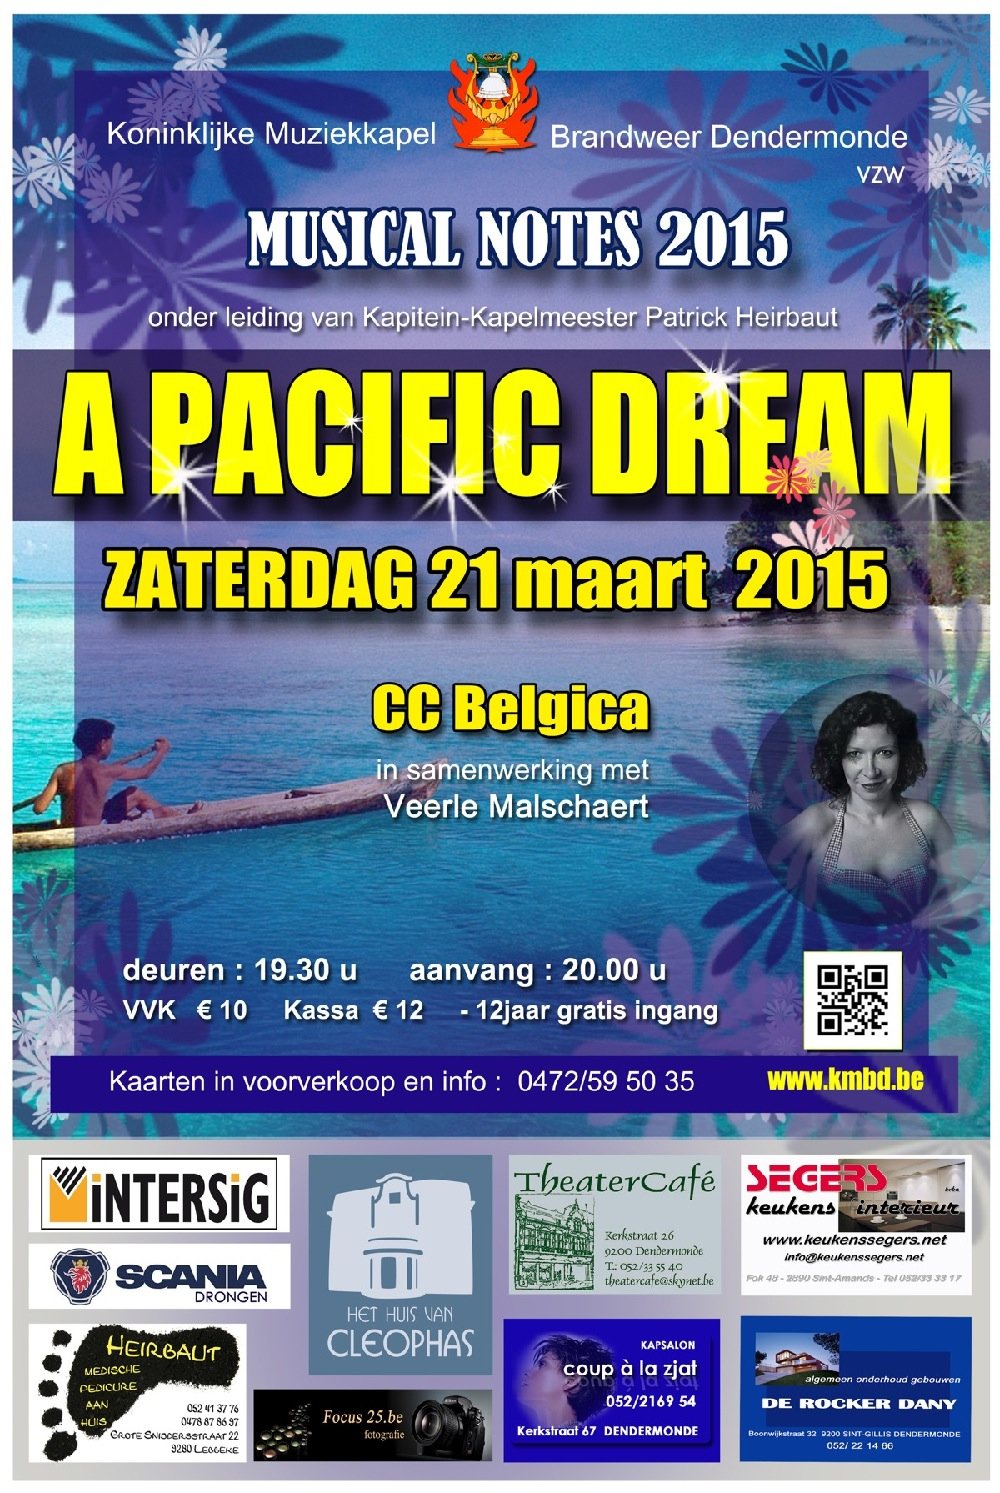 affiche Musical Notes 2015 - A Pacific Dream